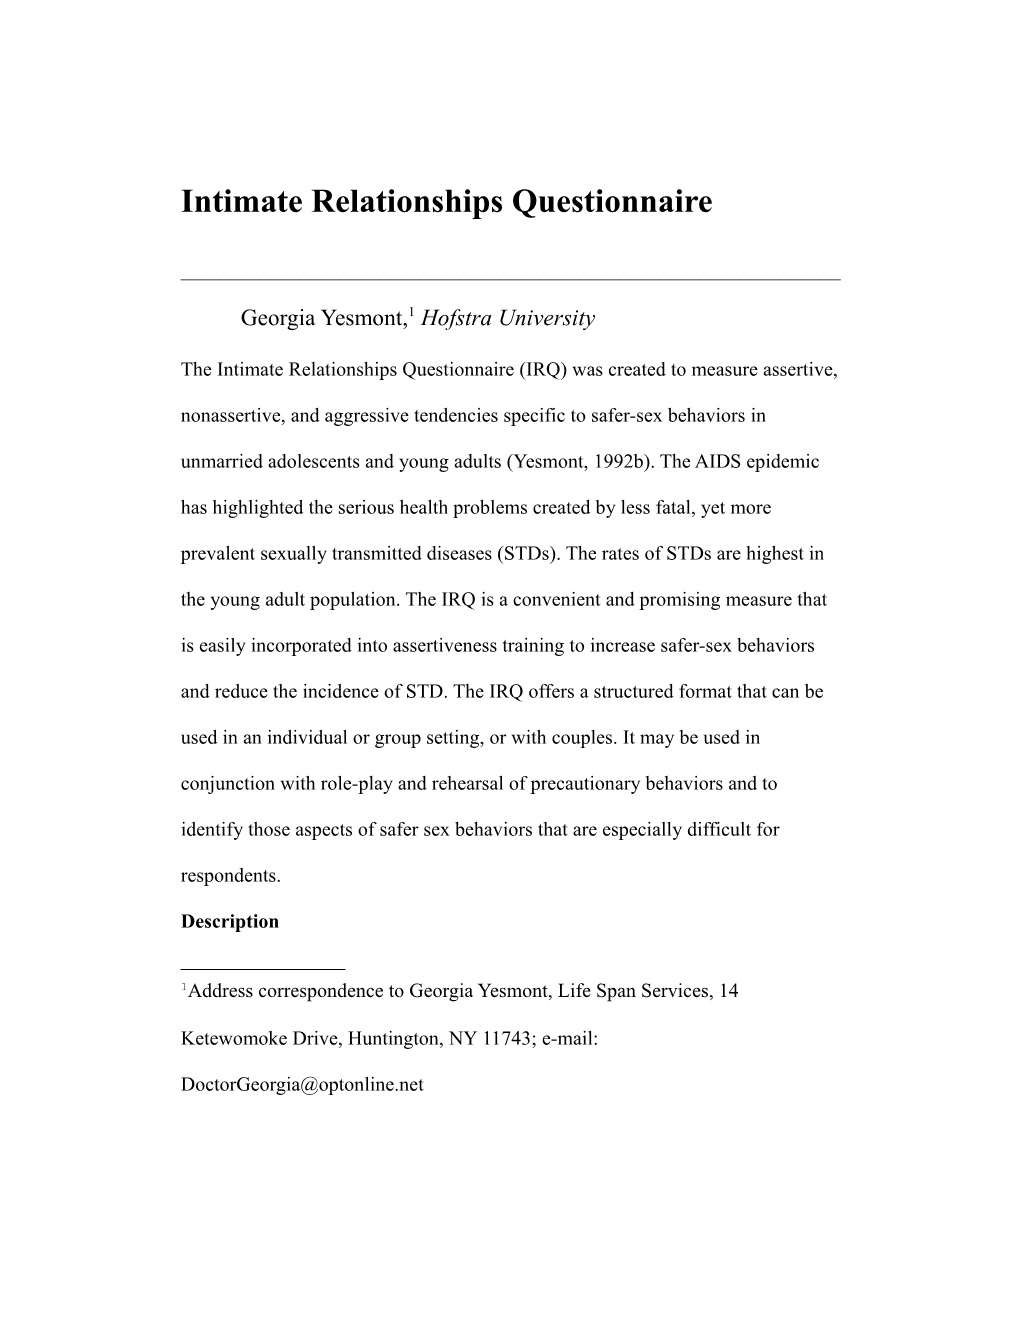 The Intimate Relationships Questionnaire